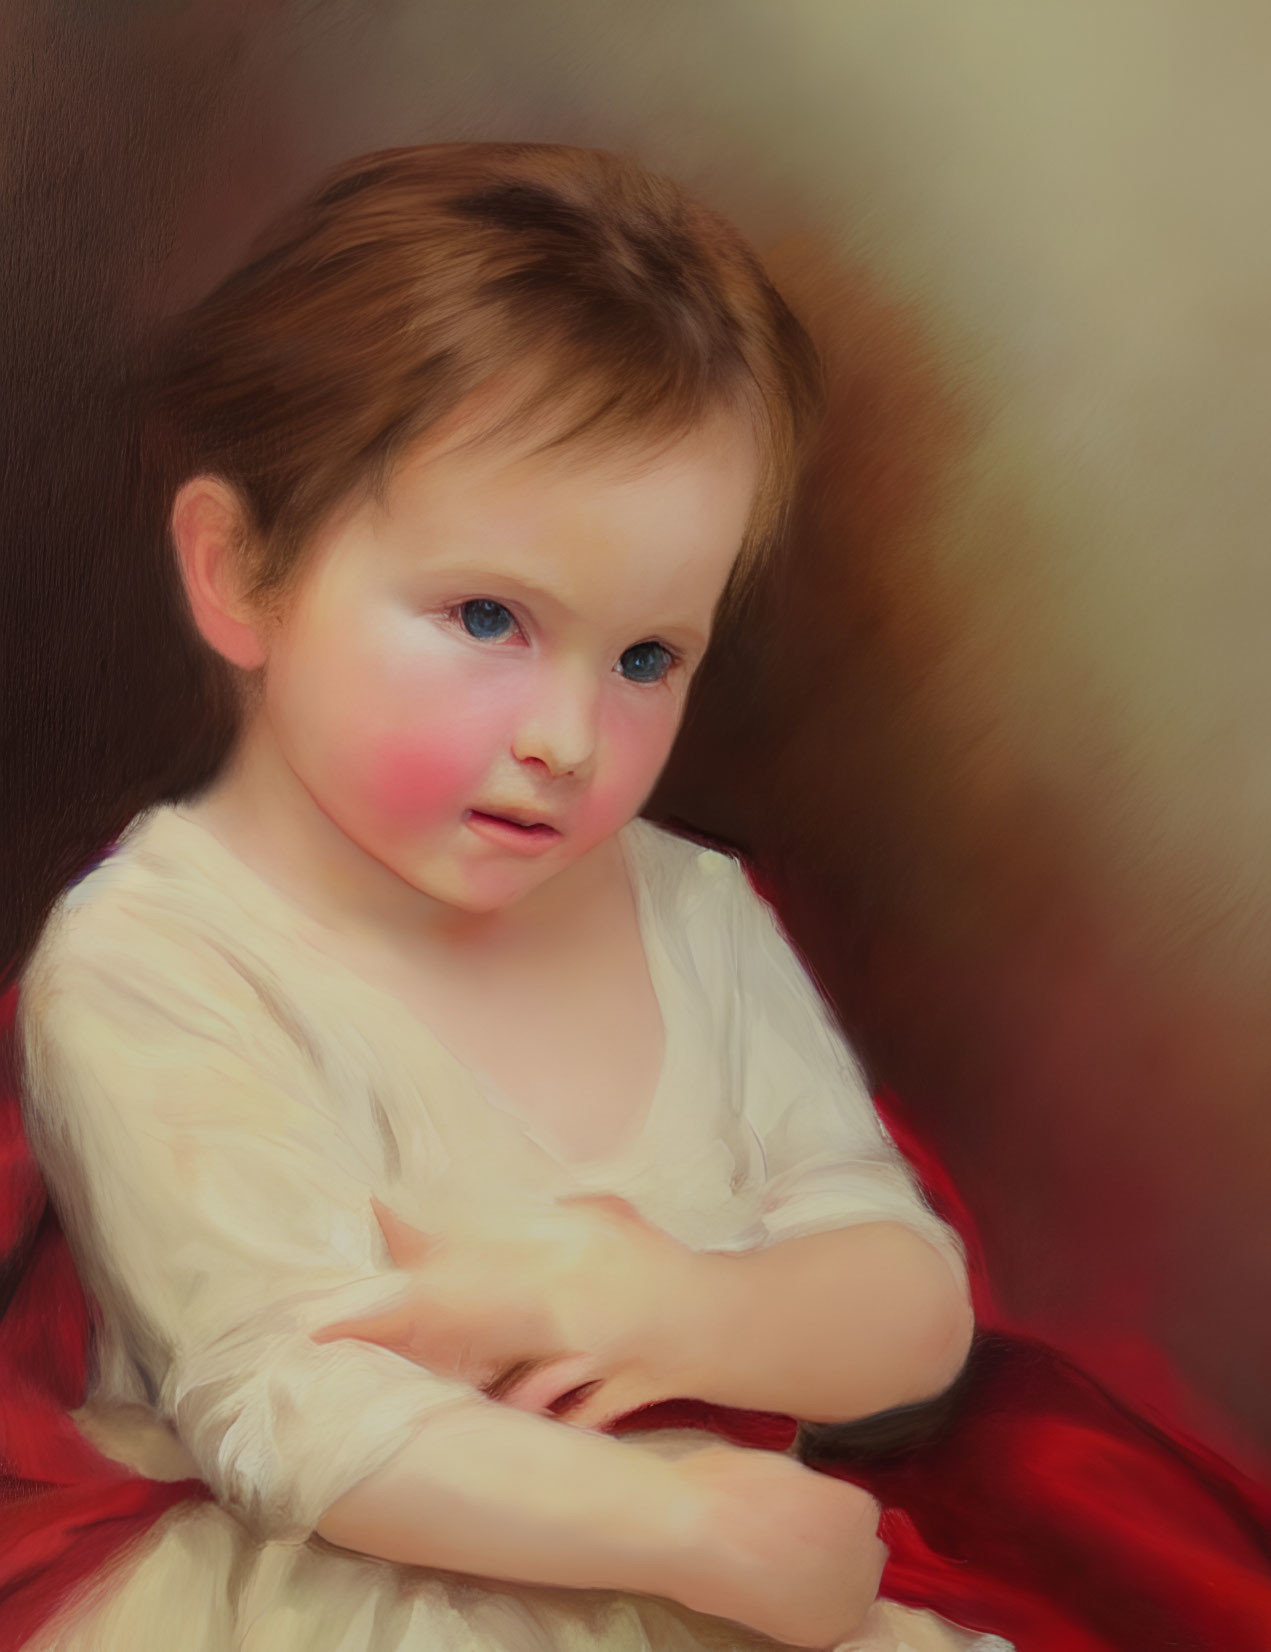 Young child portrait with rosy cheeks and short brown hair, wearing cream top, against soft brown backdrop